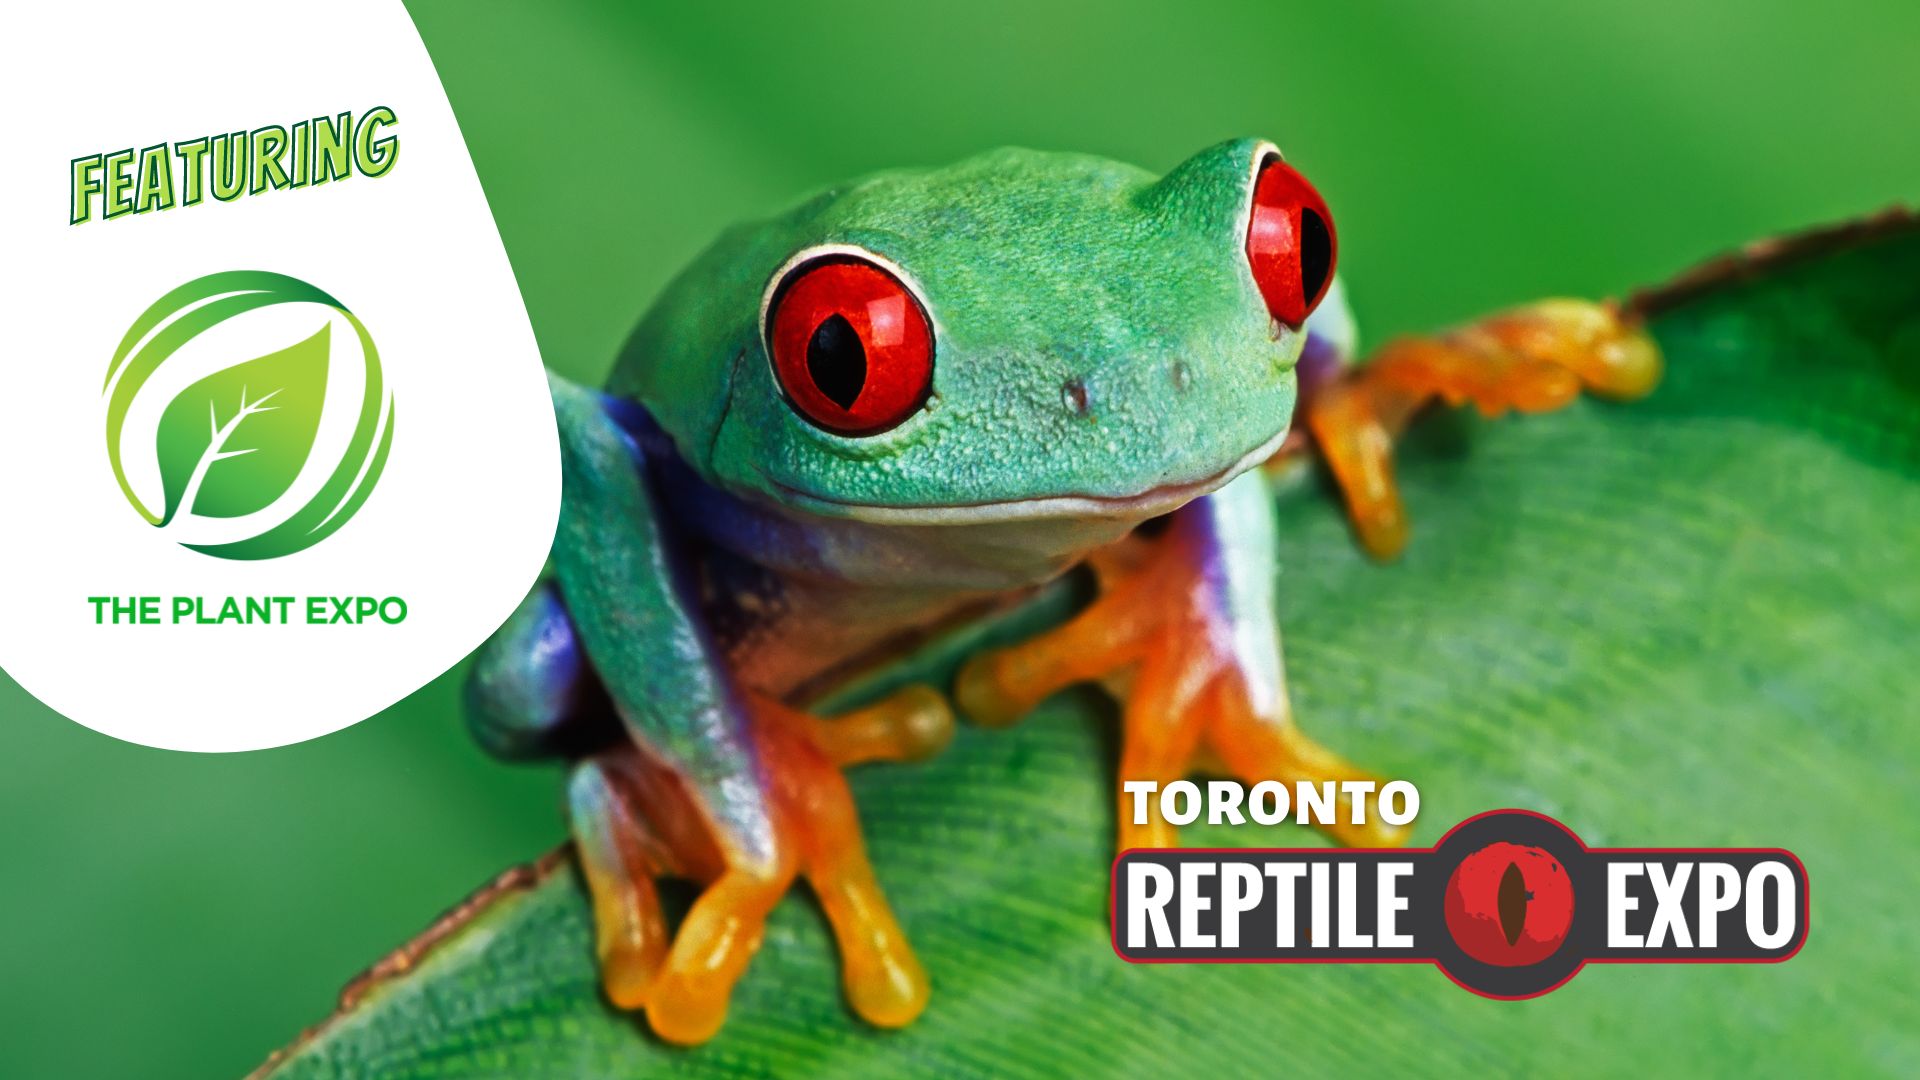 Toronto Reptile Expo featuring The Plant Expo